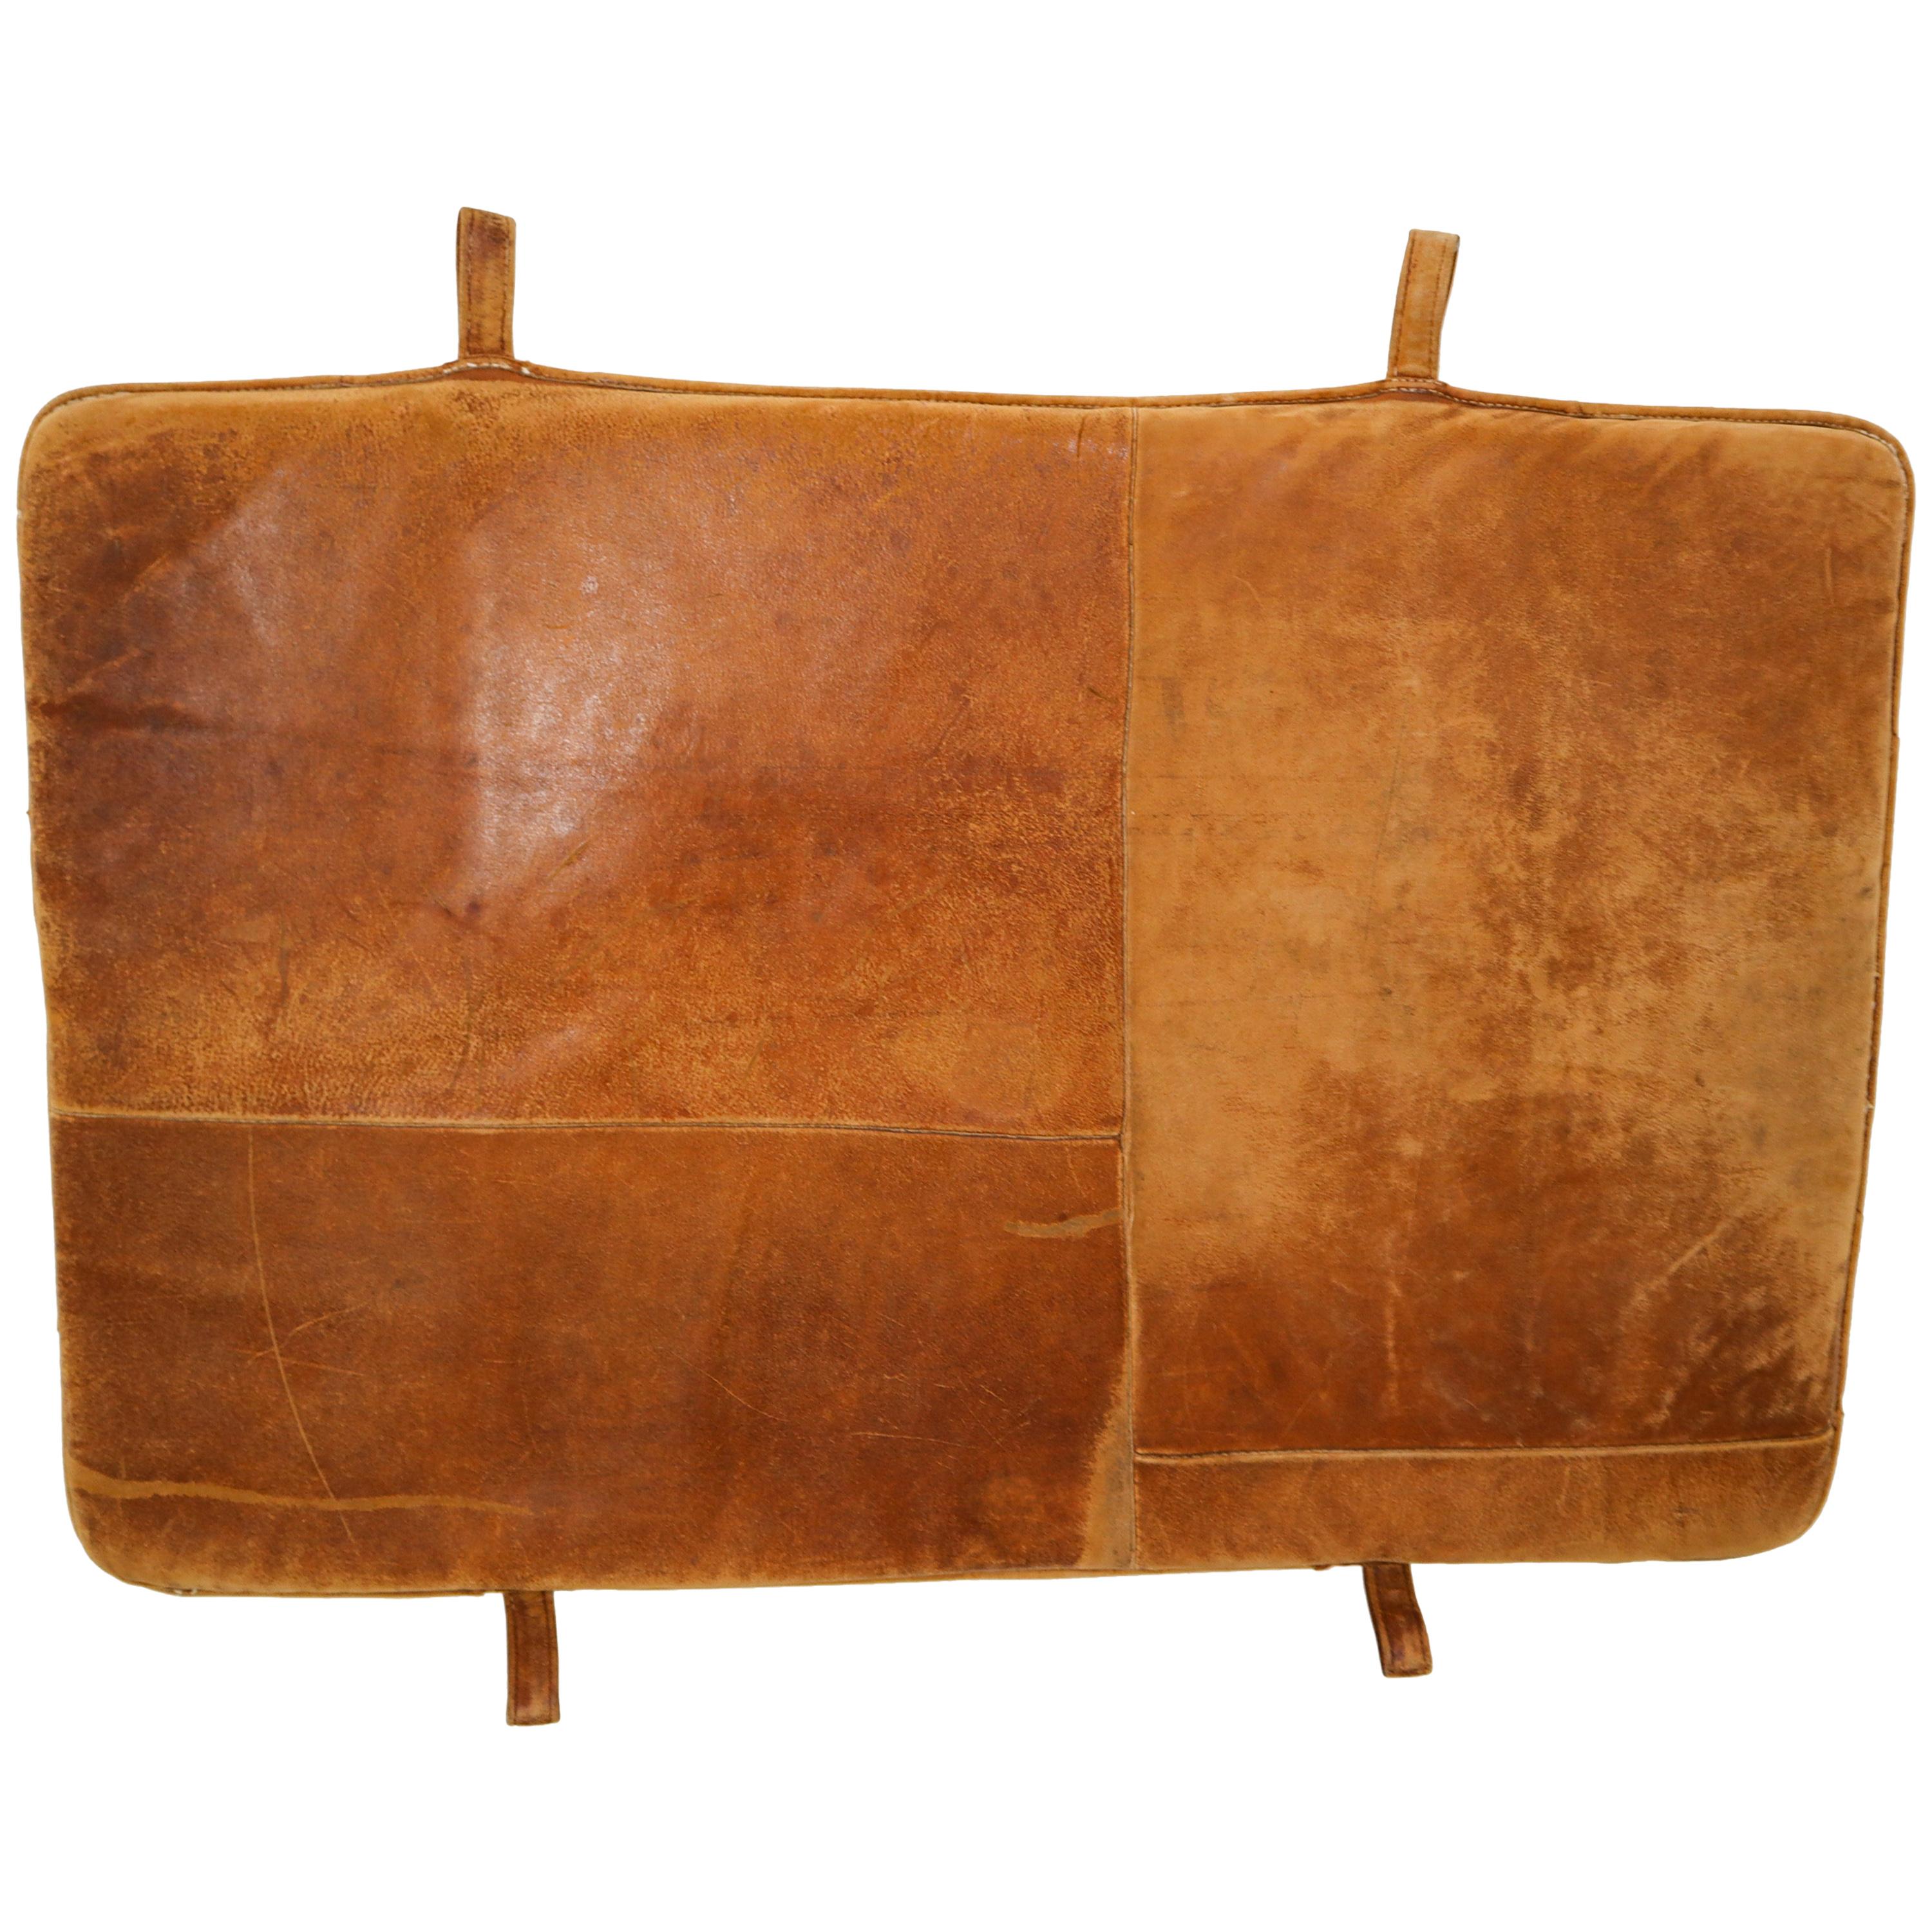 Vintage Patinated Cognac Brown Leather Gym Mat or Bedhead, 1940s